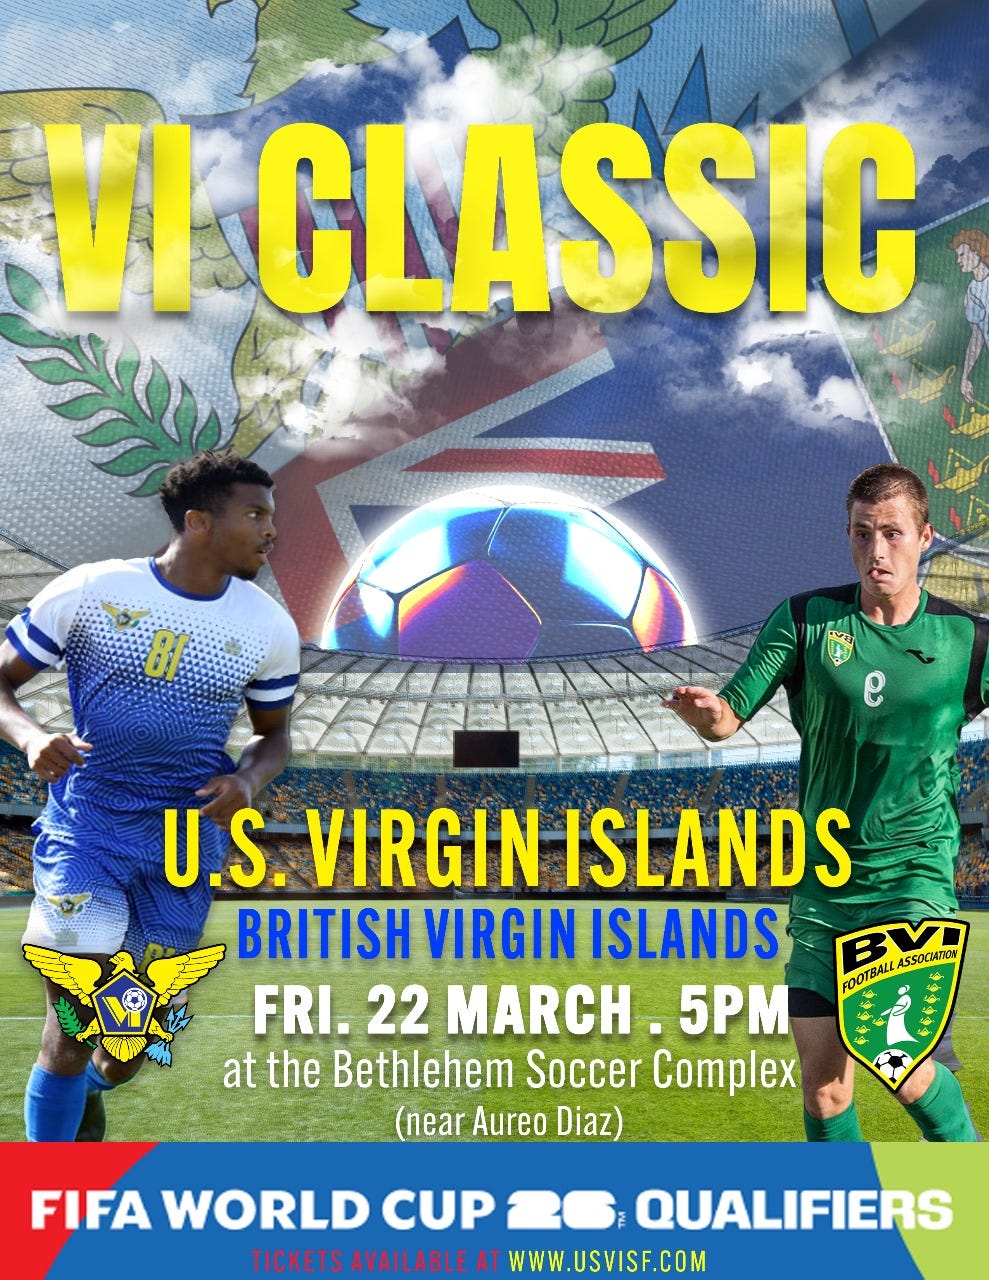 May be an image of 2 people, people playing football, people playing soccer and text that says 'VI CLASSIC 81 U.S. VIRGIN ISLANDS BRITISH VIRGIN ISLANDS BY ASSOCIATION FRI. 22 MARCH 5PM FOOTBALL at the Bethlehem Soccer Complex (near Aureo Diaz) FIFA WORLD CUP QUALIFIERS ÛKETAVAILABLET WWW.USVISF.COM'